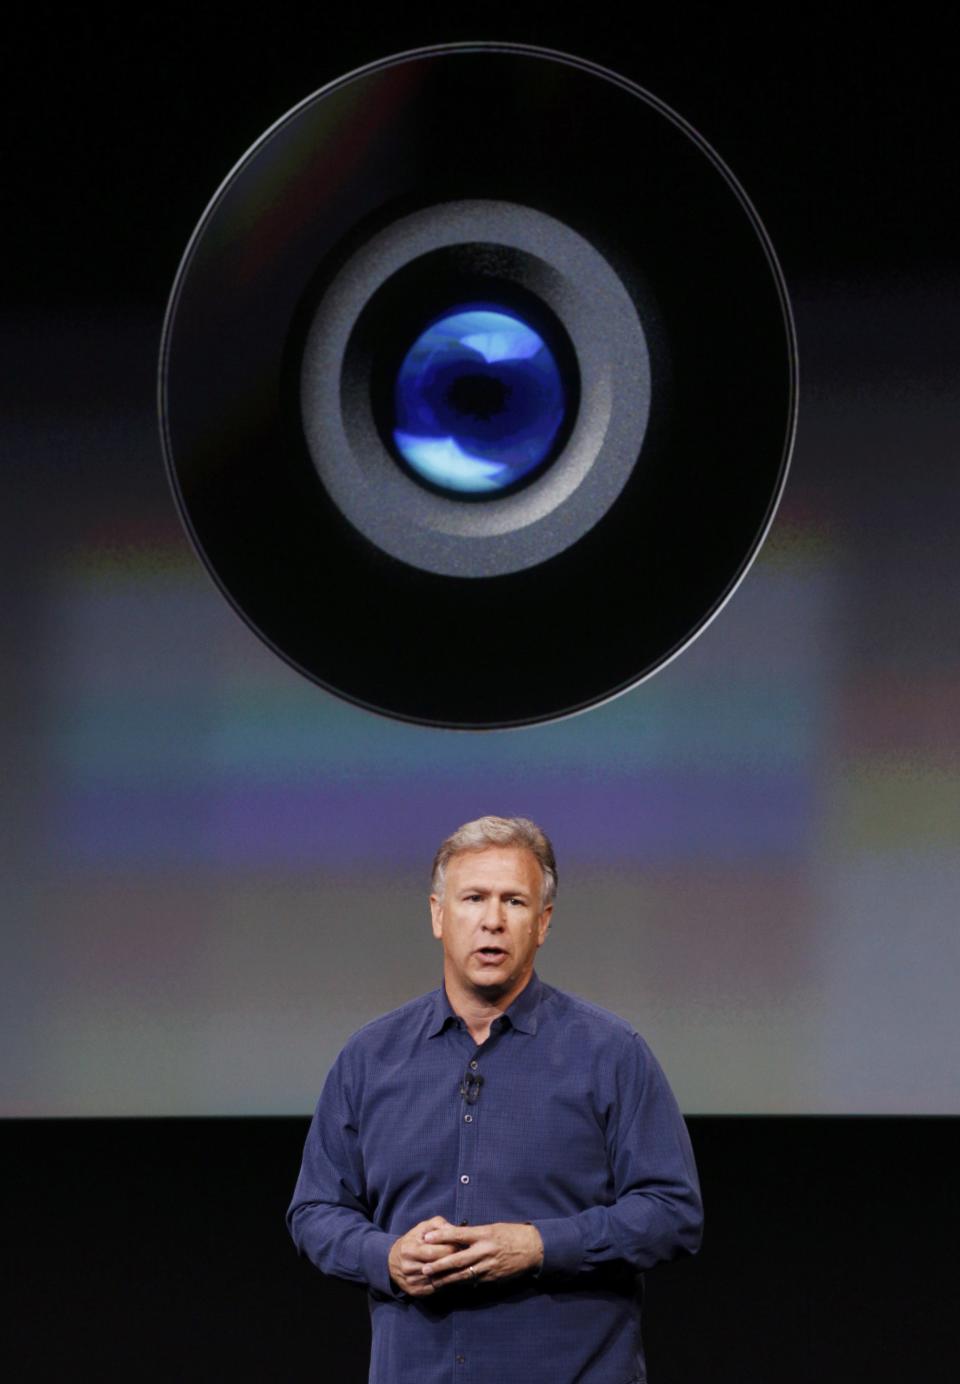 REFILE - CORRECTING NAME AND POSITION OF SPEAKER Phil Schiller, senior vice president of worldwide marketing for Apple Inc, talks about the camera in the new iPhone 5S during Apple Inc's media event in Cupertino, California September 10, 2013. REUTERS/Stephen Lam (UNITED STATES - Tags: BUSINESS SCIENCE TECHNOLOGY BUSINESS TELECOMS)